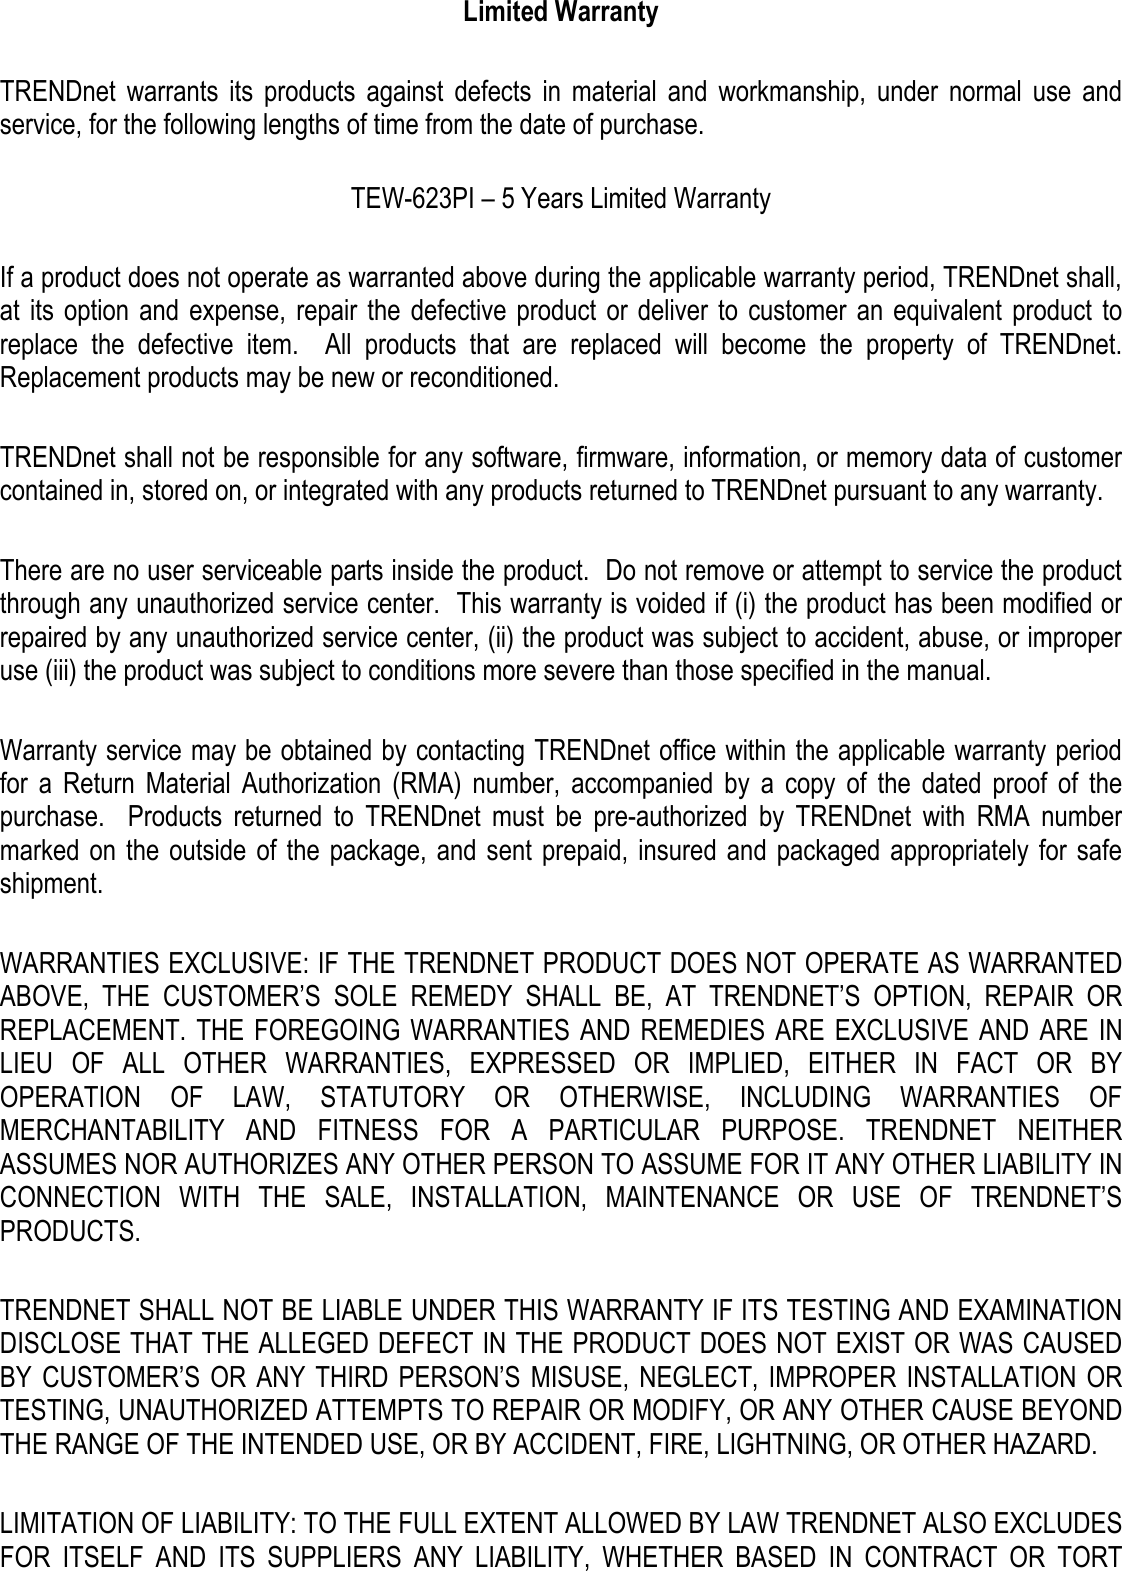  Limited Warranty  TRENDnet  warrants  its  products  against  defects  in  material  and  workmanship,  under  normal  use  and service, for the following lengths of time from the date of purchase.    TEW-623PI – 5 Years Limited Warranty  If a product does not operate as warranted above during the applicable warranty period, TRENDnet shall, at  its  option  and  expense,  repair the  defective product or deliver to  customer  an  equivalent product  to replace  the  defective  item.    All  products  that  are  replaced  will  become  the  property  of  TRENDnet.  Replacement products may be new or reconditioned.  TRENDnet shall not be responsible for any software, firmware, information, or memory data of customer contained in, stored on, or integrated with any products returned to TRENDnet pursuant to any warranty.  There are no user serviceable parts inside the product.  Do not remove or attempt to service the product through any unauthorized service center.  This warranty is voided if (i) the product has been modified or repaired by any unauthorized service center, (ii) the product was subject to accident, abuse, or improper use (iii) the product was subject to conditions more severe than those specified in the manual.  Warranty service may be obtained by contacting TRENDnet office within the applicable warranty period for  a  Return  Material  Authorization  (RMA)  number,  accompanied  by  a  copy  of  the  dated  proof  of  the purchase.    Products  returned  to  TRENDnet  must  be  pre-authorized  by  TRENDnet  with  RMA  number marked on  the  outside of the package, and sent  prepaid, insured  and  packaged appropriately for  safe shipment.    WARRANTIES EXCLUSIVE: IF THE TRENDNET PRODUCT DOES NOT OPERATE AS WARRANTED ABOVE,  THE  CUSTOMER’S  SOLE  REMEDY  SHALL  BE,  AT  TRENDNET’S  OPTION,  REPAIR  OR REPLACEMENT. THE FOREGOING WARRANTIES AND REMEDIES  ARE  EXCLUSIVE AND  ARE  IN LIEU  OF  ALL  OTHER  WARRANTIES,  EXPRESSED  OR  IMPLIED,  EITHER  IN  FACT  OR  BY OPERATION  OF  LAW,  STATUTORY  OR  OTHERWISE,  INCLUDING  WARRANTIES  OF MERCHANTABILITY  AND  FITNESS  FOR  A  PARTICULAR  PURPOSE.  TRENDNET  NEITHER ASSUMES NOR AUTHORIZES ANY OTHER PERSON TO ASSUME FOR IT ANY OTHER LIABILITY IN CONNECTION  WITH  THE  SALE,  INSTALLATION,  MAINTENANCE  OR  USE  OF  TRENDNET’S PRODUCTS.  TRENDNET SHALL NOT BE LIABLE UNDER THIS WARRANTY IF ITS TESTING AND EXAMINATION DISCLOSE THAT THE ALLEGED DEFECT IN THE PRODUCT DOES NOT EXIST OR WAS CAUSED BY  CUSTOMER’S OR  ANY  THIRD  PERSON’S MISUSE, NEGLECT, IMPROPER INSTALLATION OR TESTING, UNAUTHORIZED ATTEMPTS TO REPAIR OR MODIFY, OR ANY OTHER CAUSE BEYOND THE RANGE OF THE INTENDED USE, OR BY ACCIDENT, FIRE, LIGHTNING, OR OTHER HAZARD.  LIMITATION OF LIABILITY: TO THE FULL EXTENT ALLOWED BY LAW TRENDNET ALSO EXCLUDES FOR  ITSELF  AND  ITS  SUPPLIERS  ANY  LIABILITY,  WHETHER  BASED  IN  CONTRACT  OR  TORT 